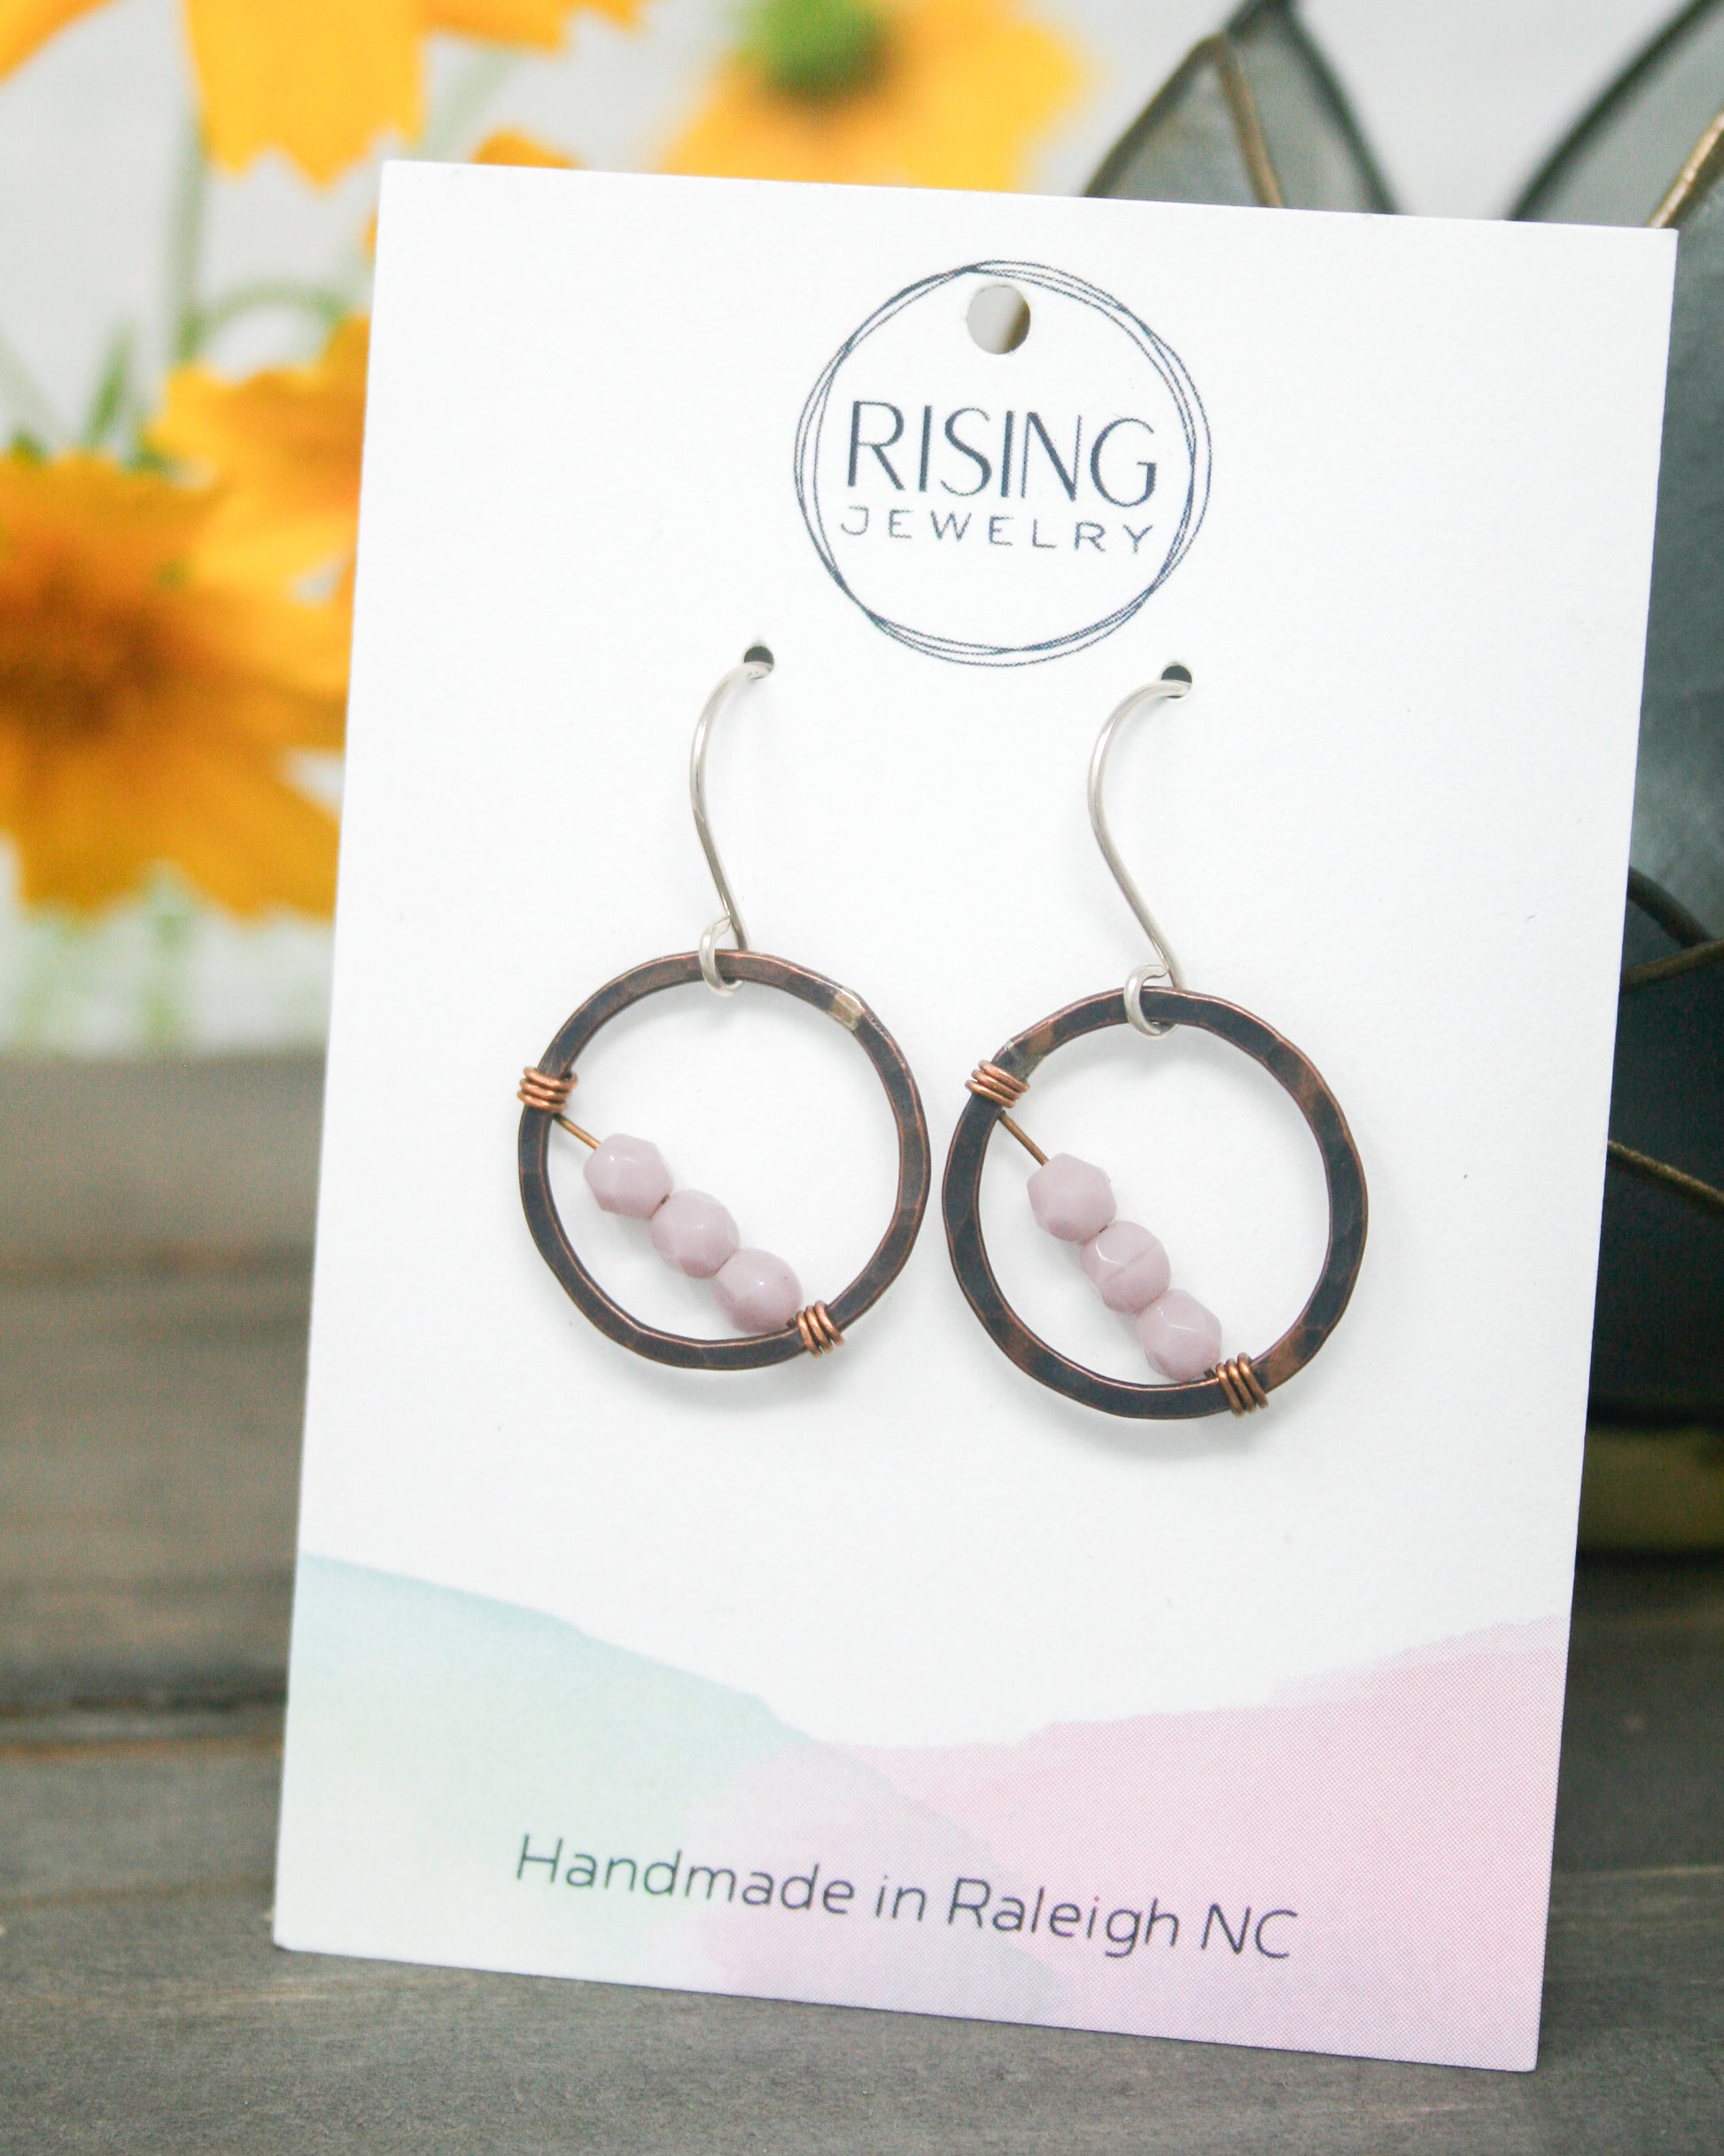 a picture of a pair of earrings on a card